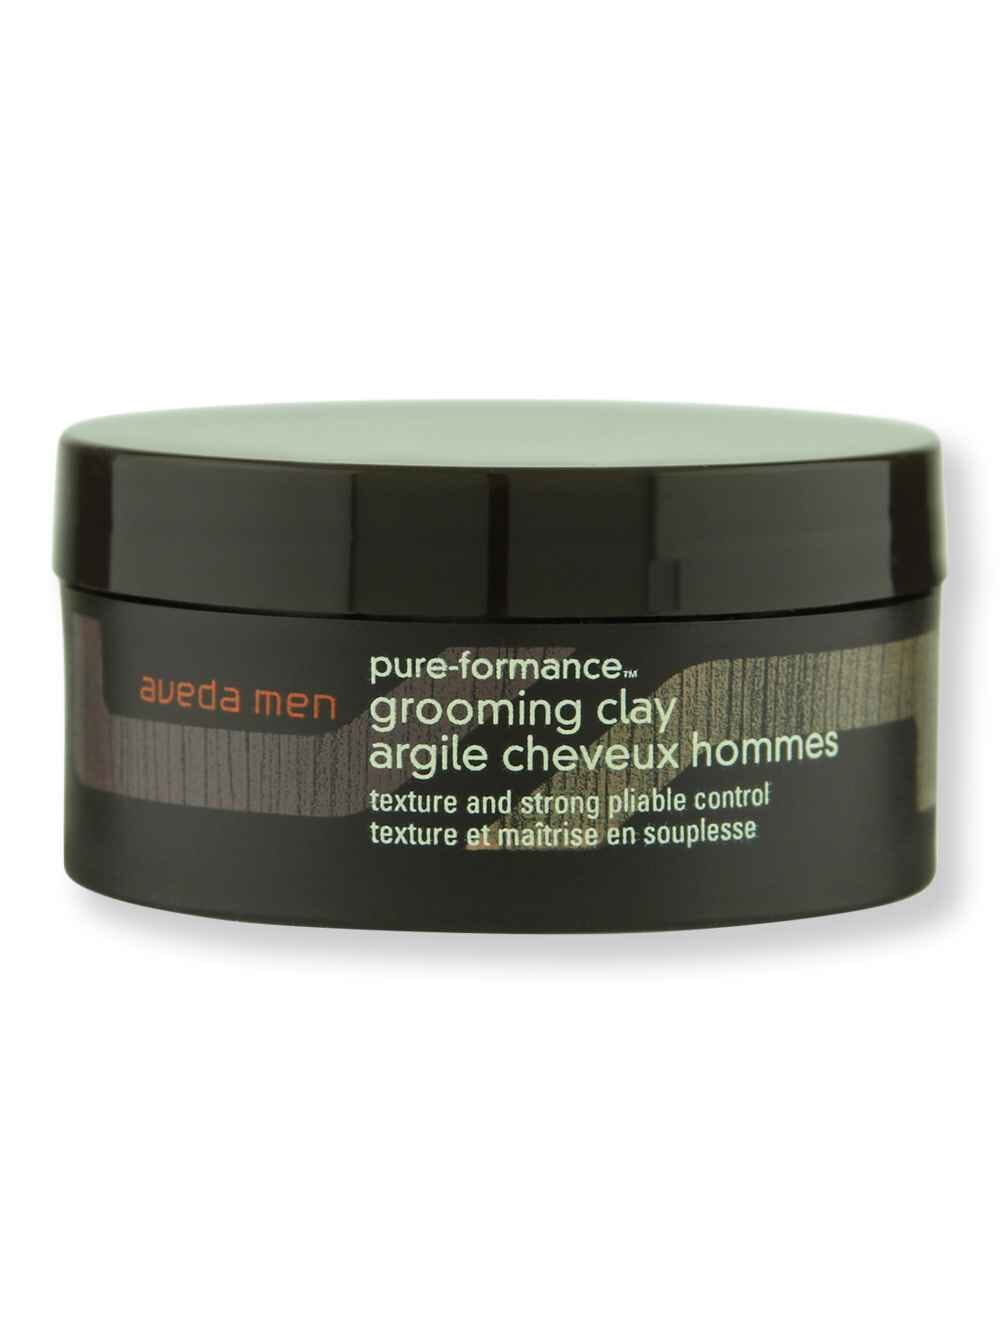 Aveda Aveda Men Pure-Formance Grooming Clay 75 ml Styling Treatments 